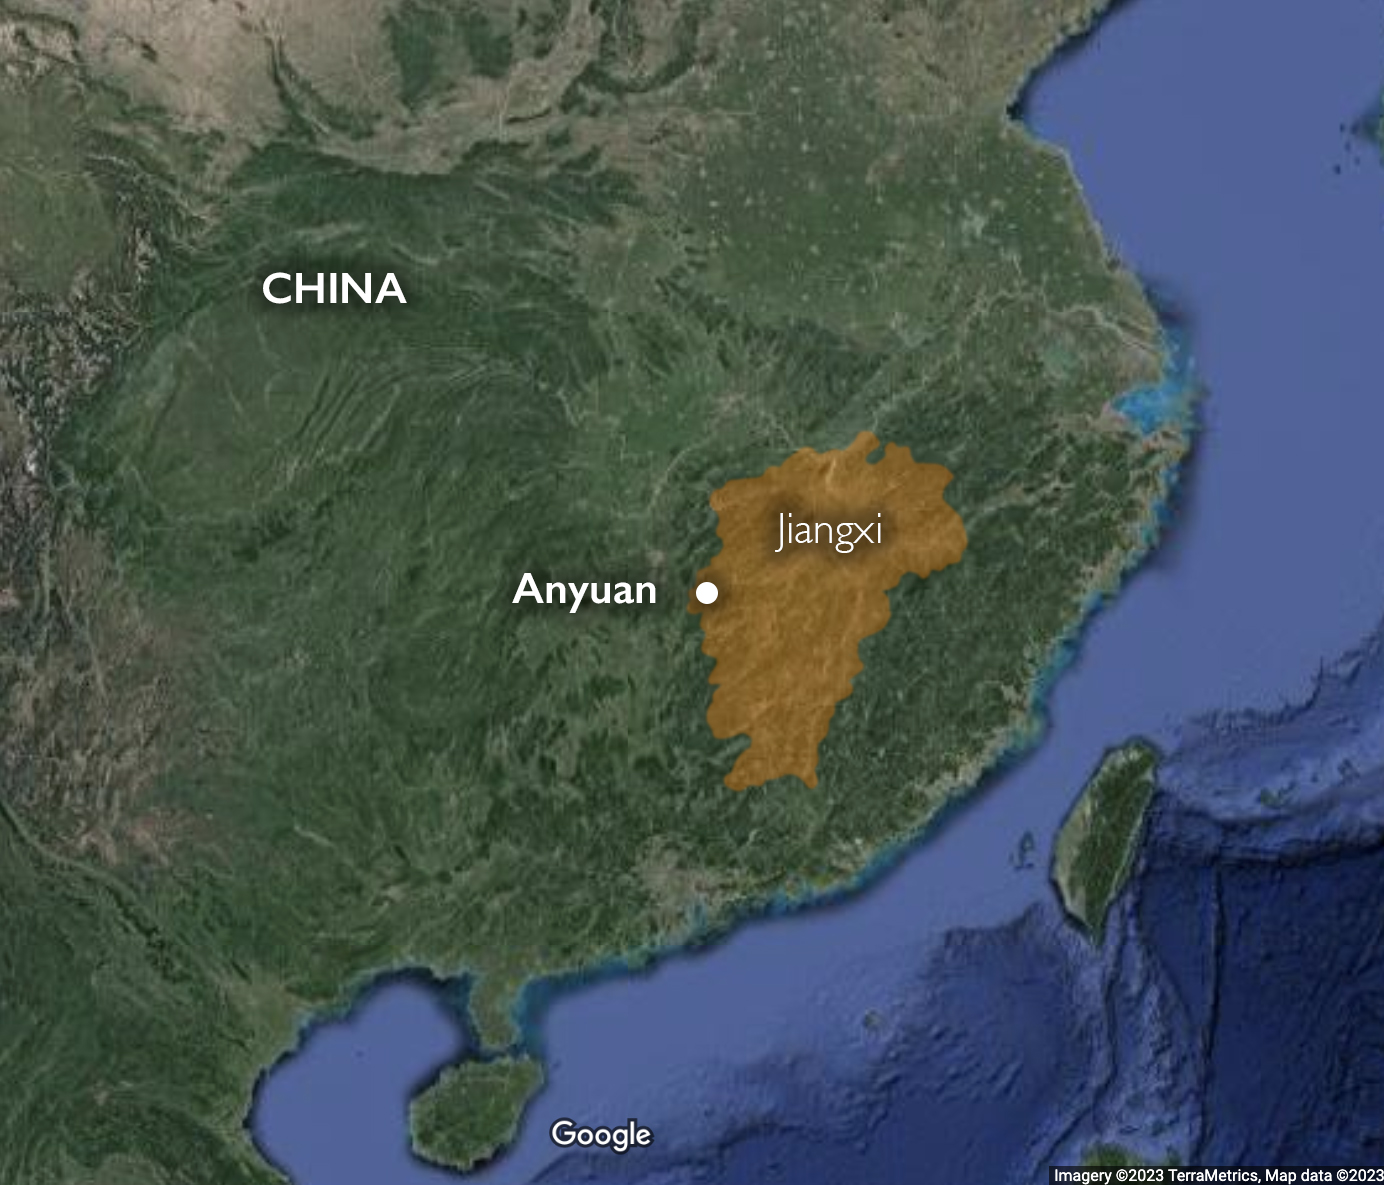 Map showing Anyuan within Jiangxi province in China (underlying map © Google)